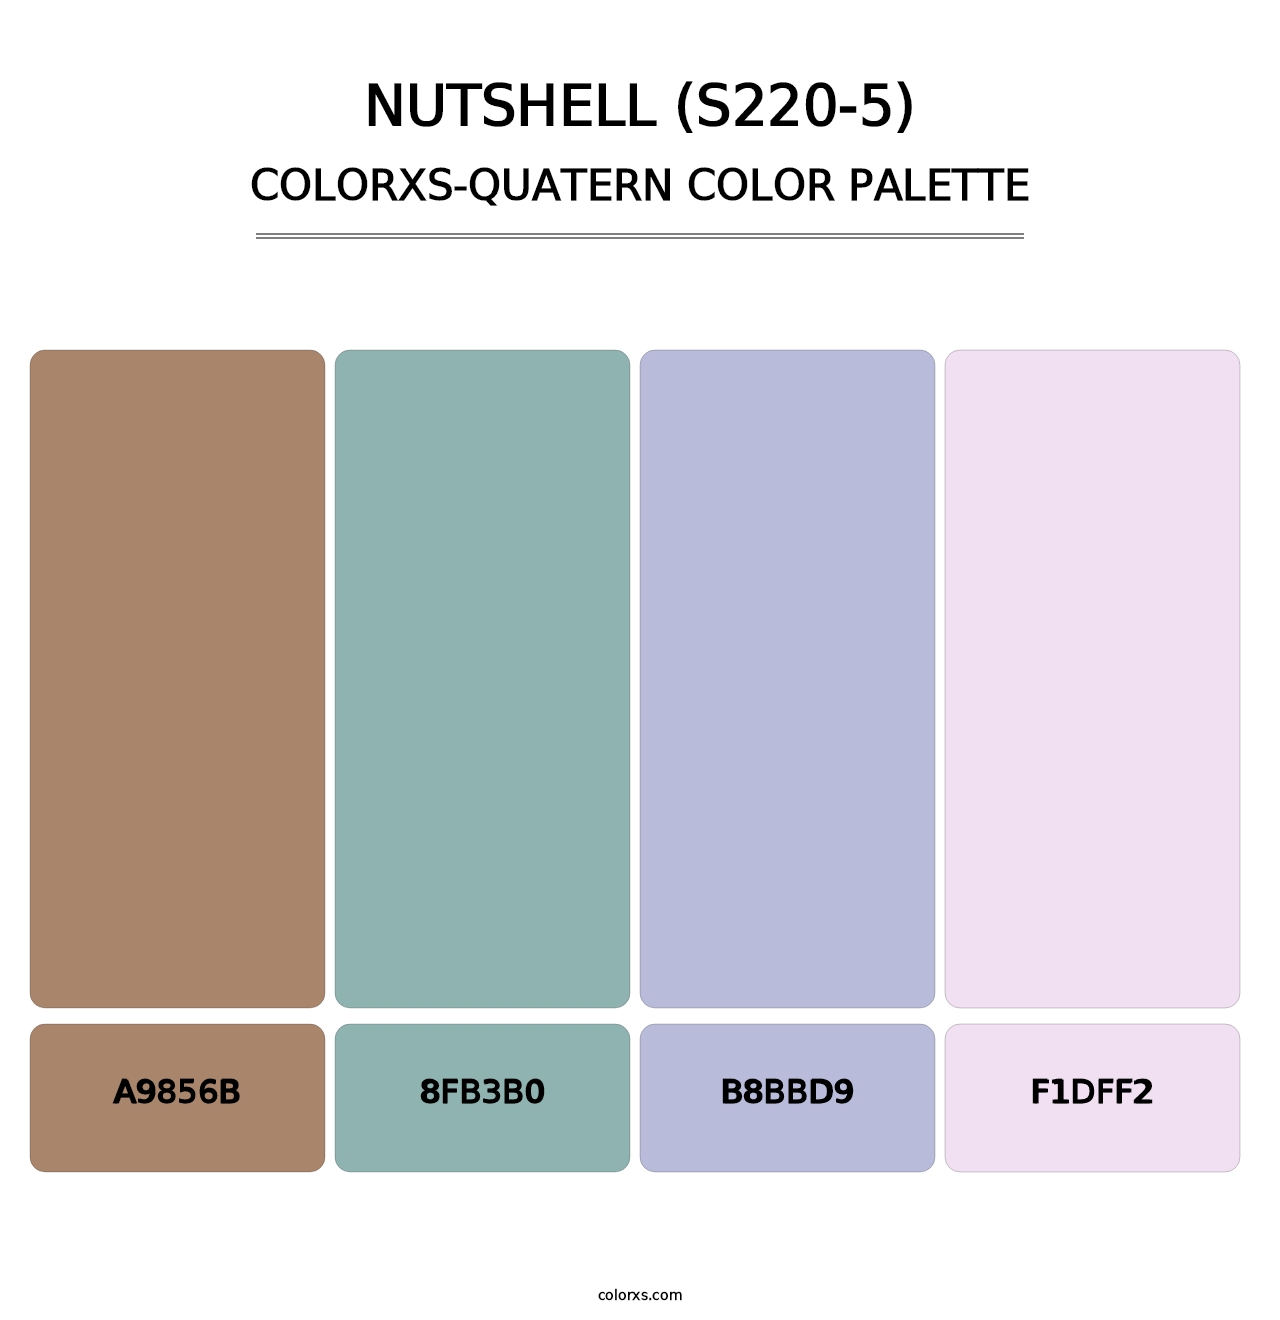 Nutshell (S220-5) - Colorxs Quatern Palette